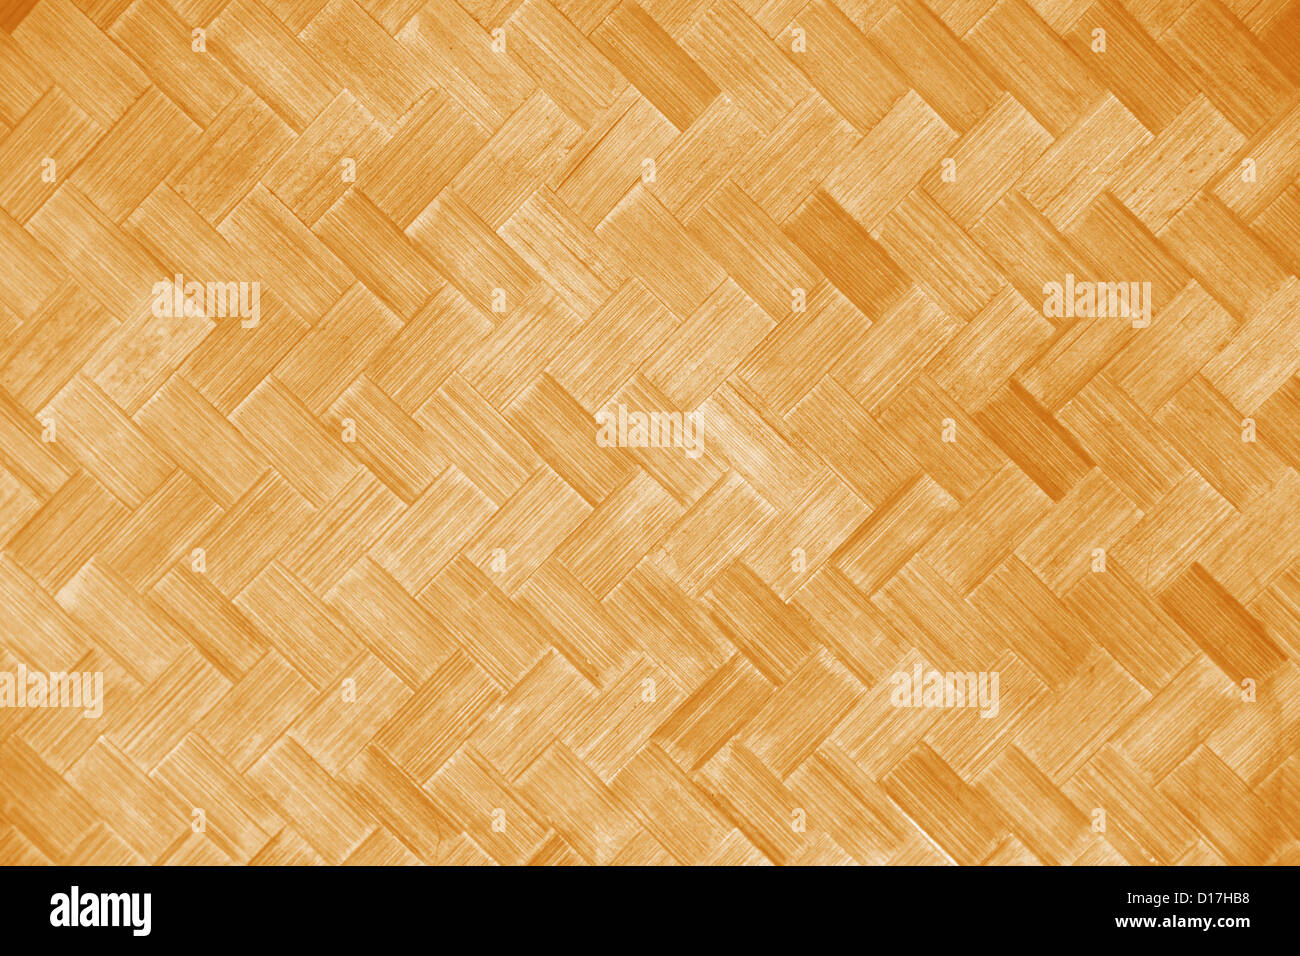 Detail Of Woven Lauhala Mat Texture, Background. Stock Photo